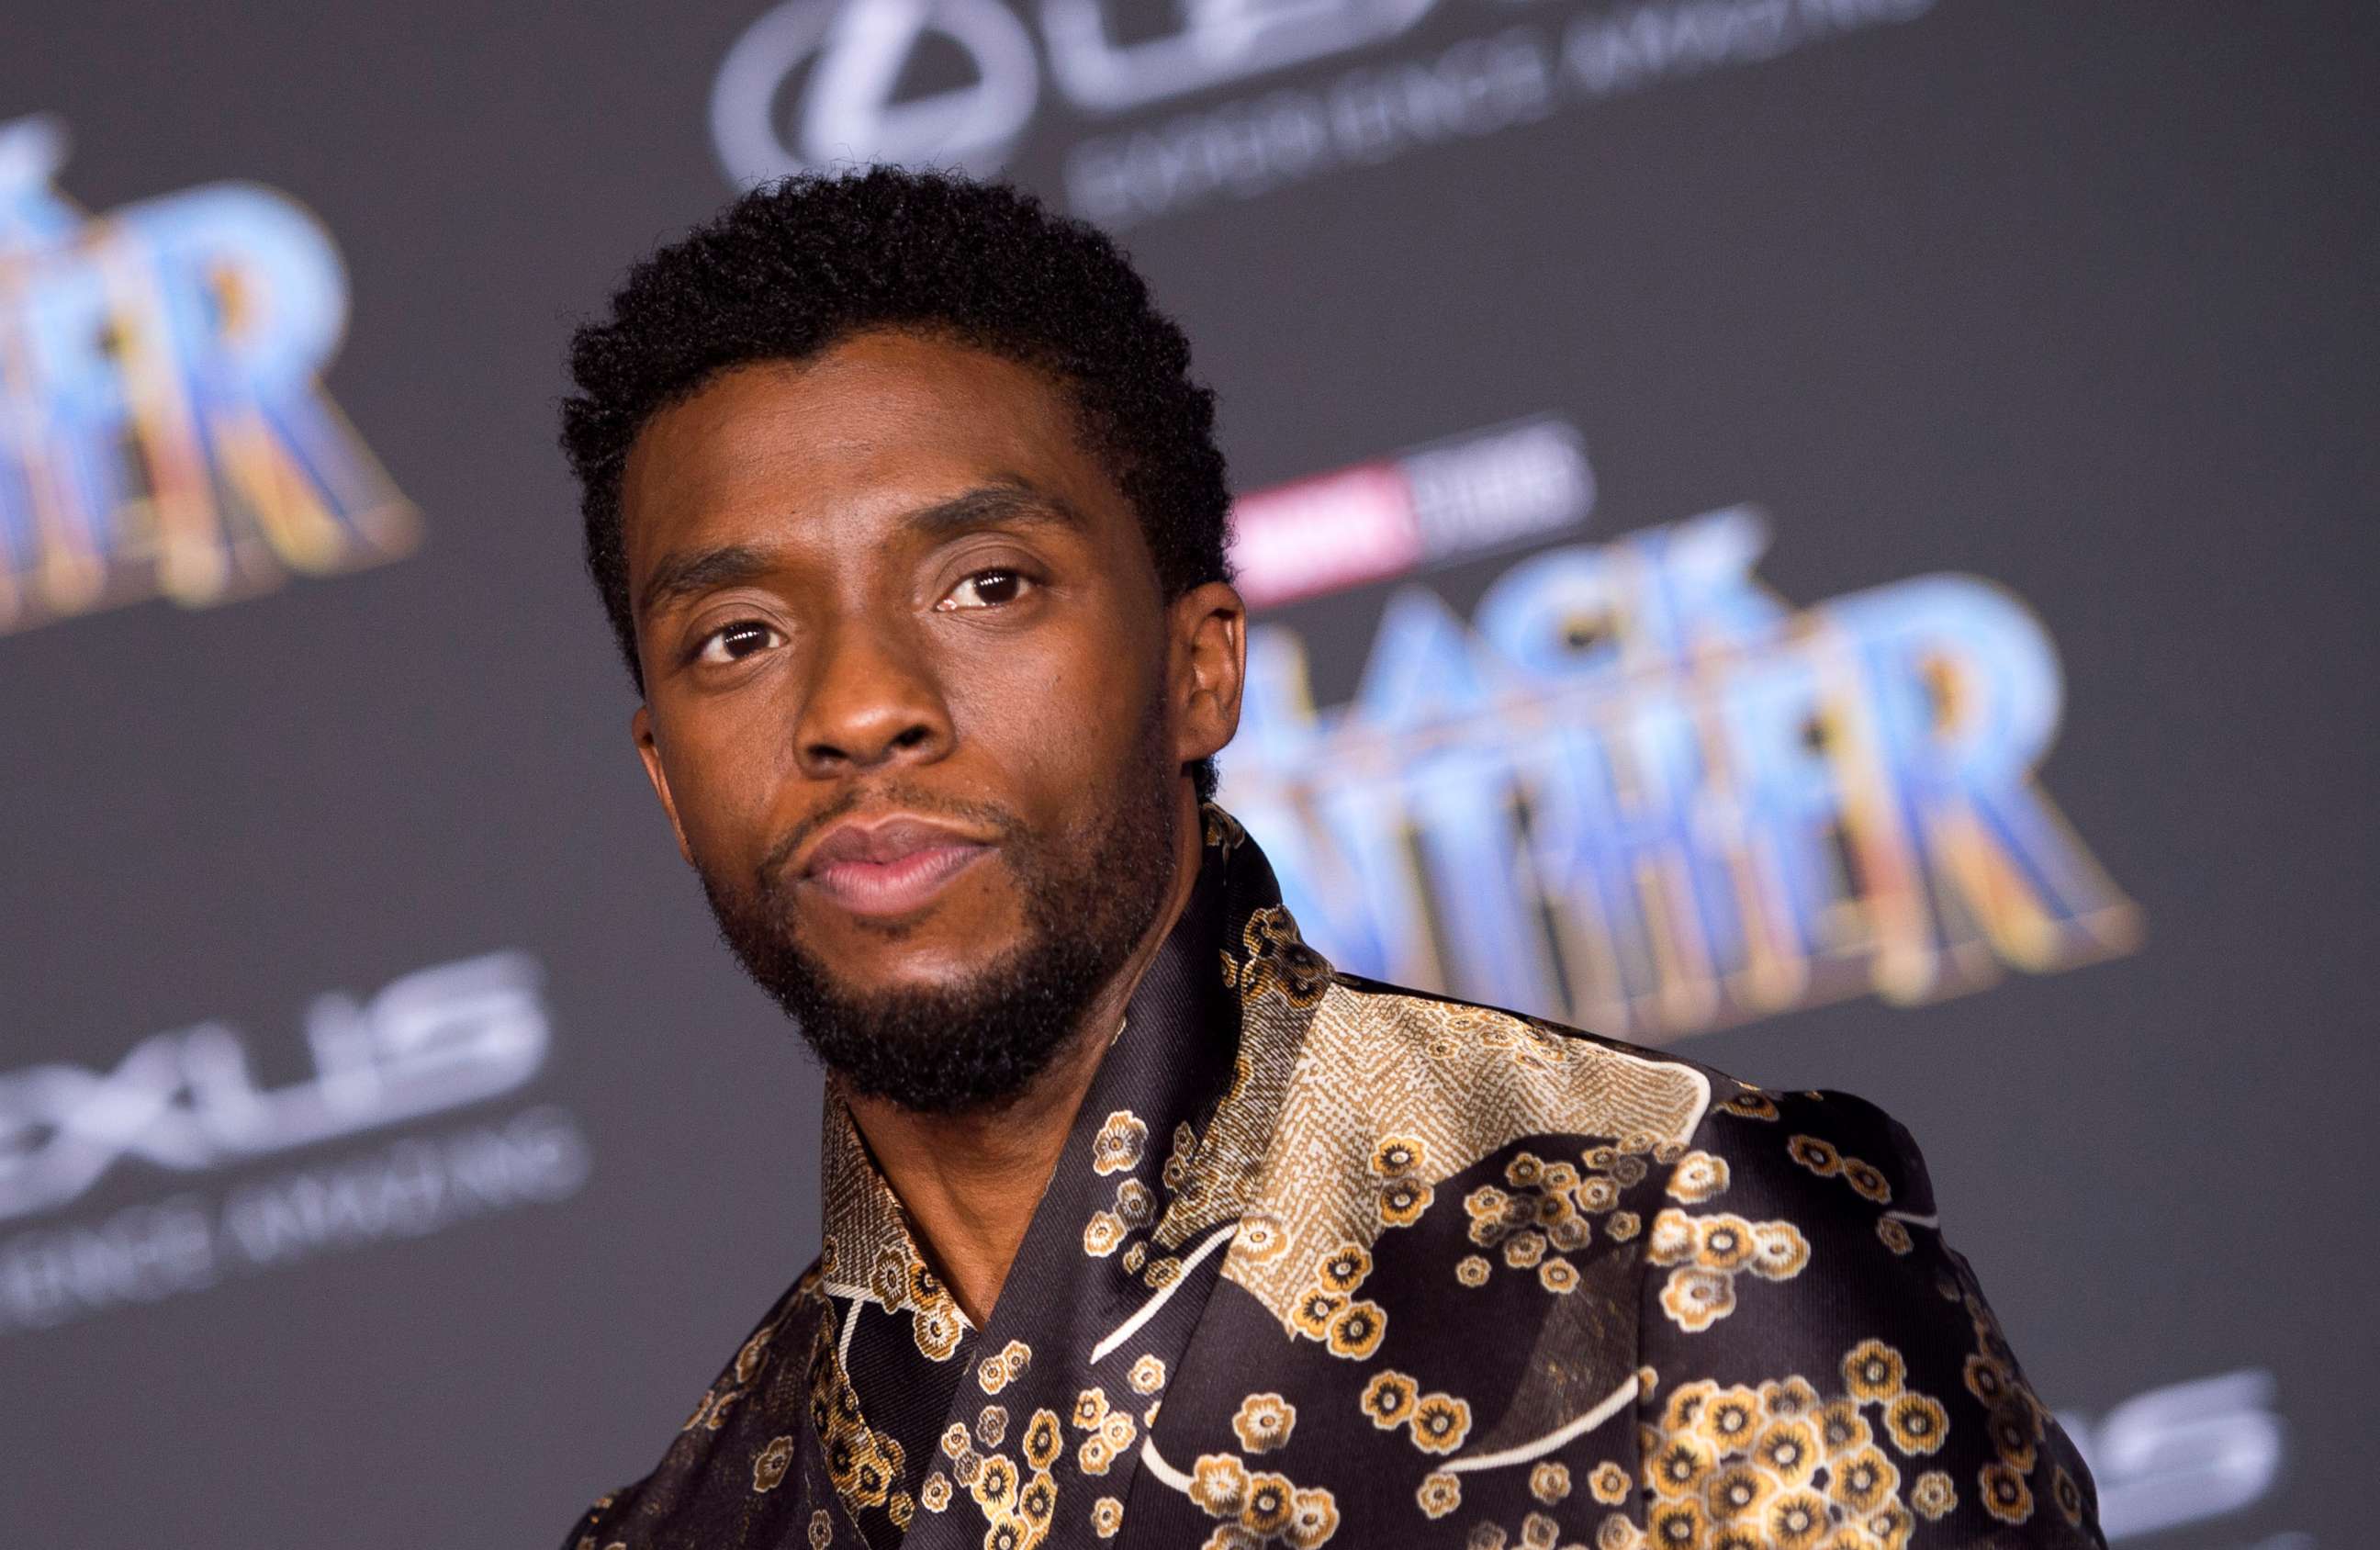 PHOTO: In this file photo taken on Jan. 29, 2018, actor Chadwick Boseman attends the world premiere of Marvel Studios "Black Panther," in Hollywood.